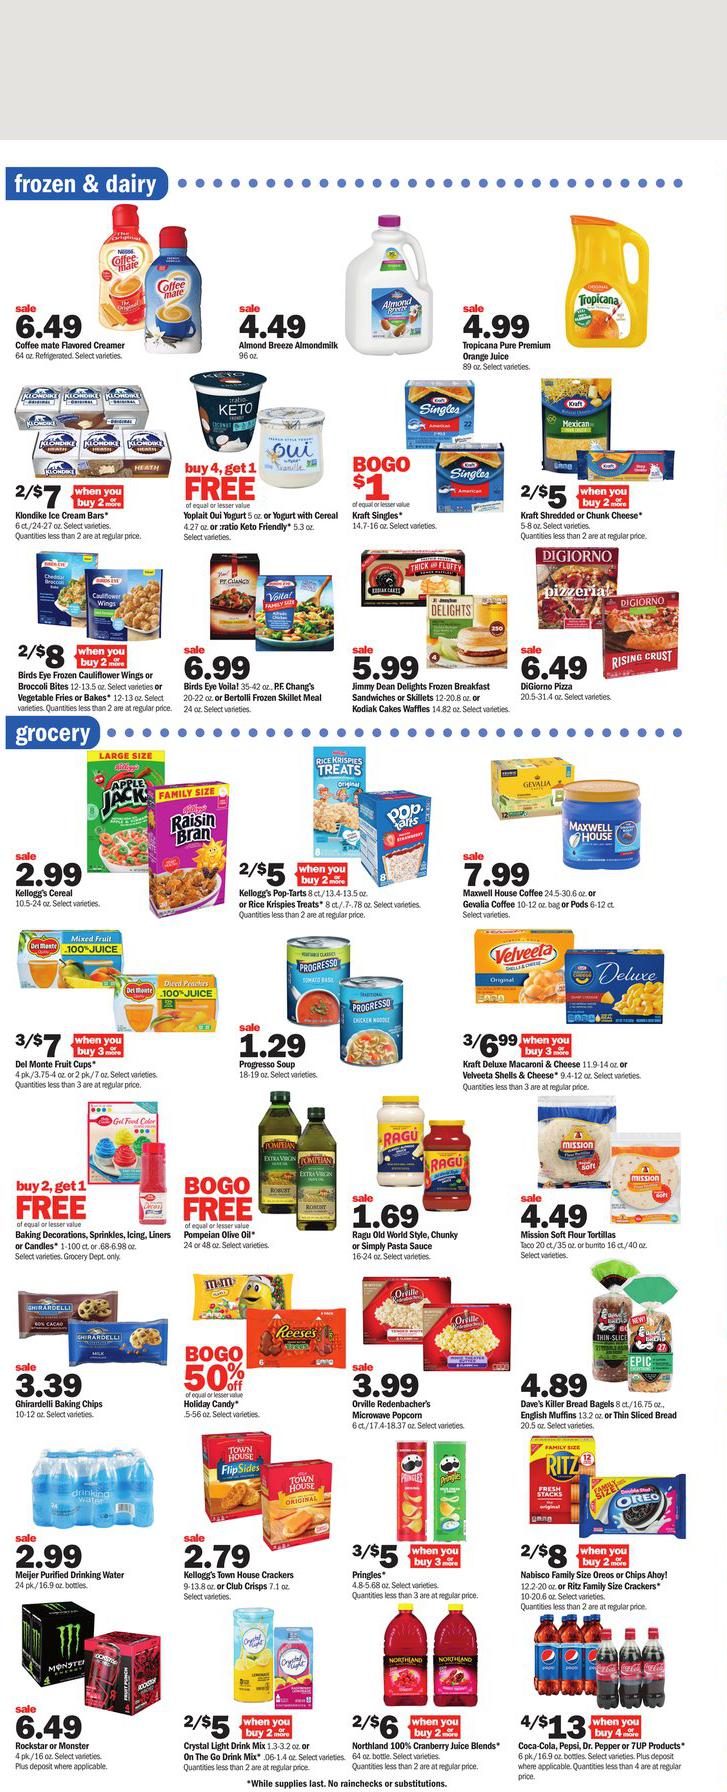 04.12.2022 Meijer ad 5. page